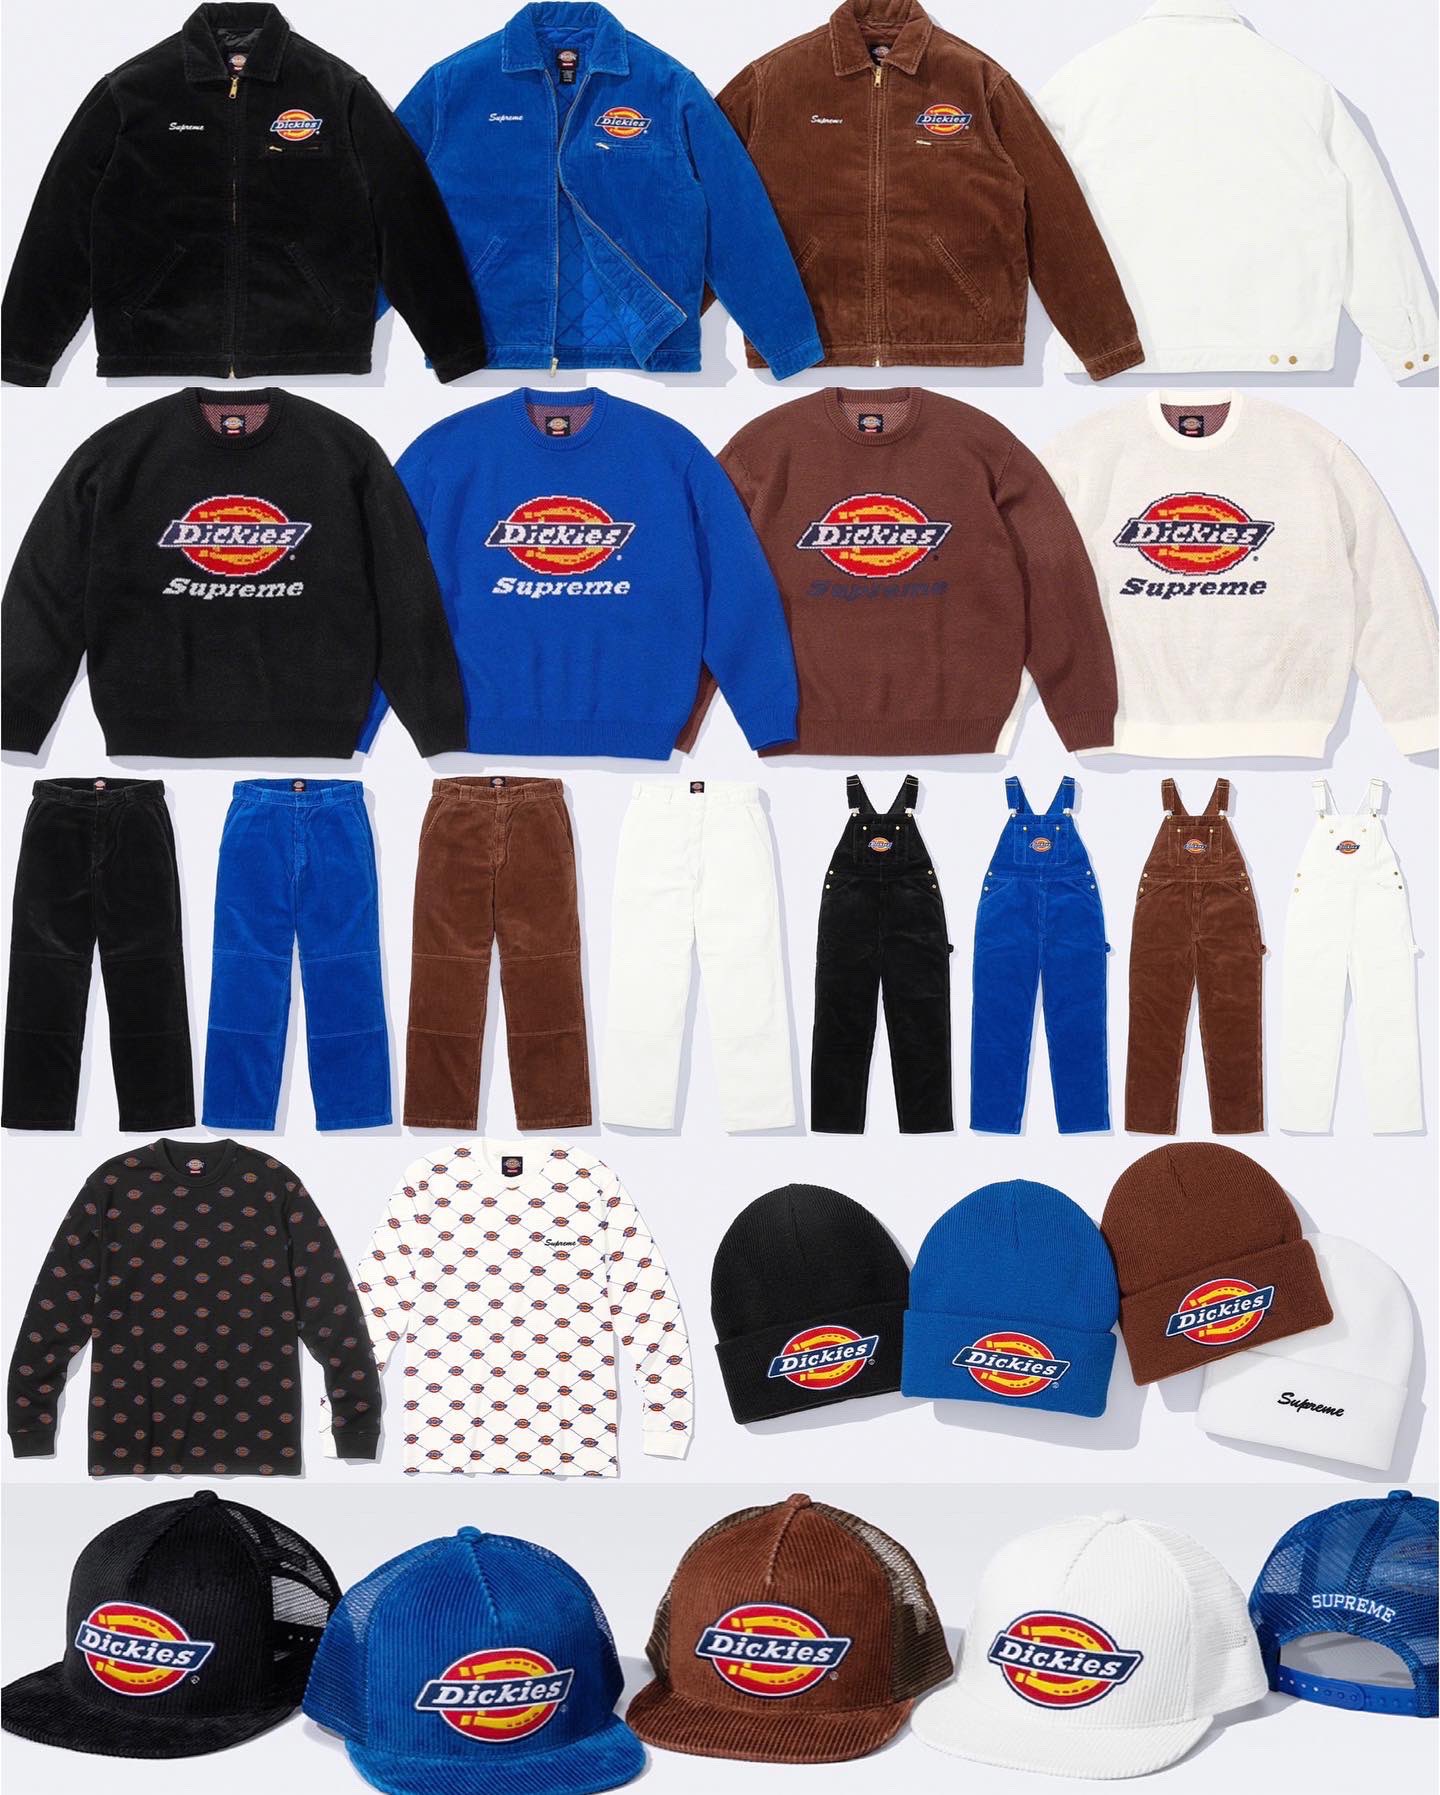 DropsByJay on X: "Supreme/Dickies Official images of the collab